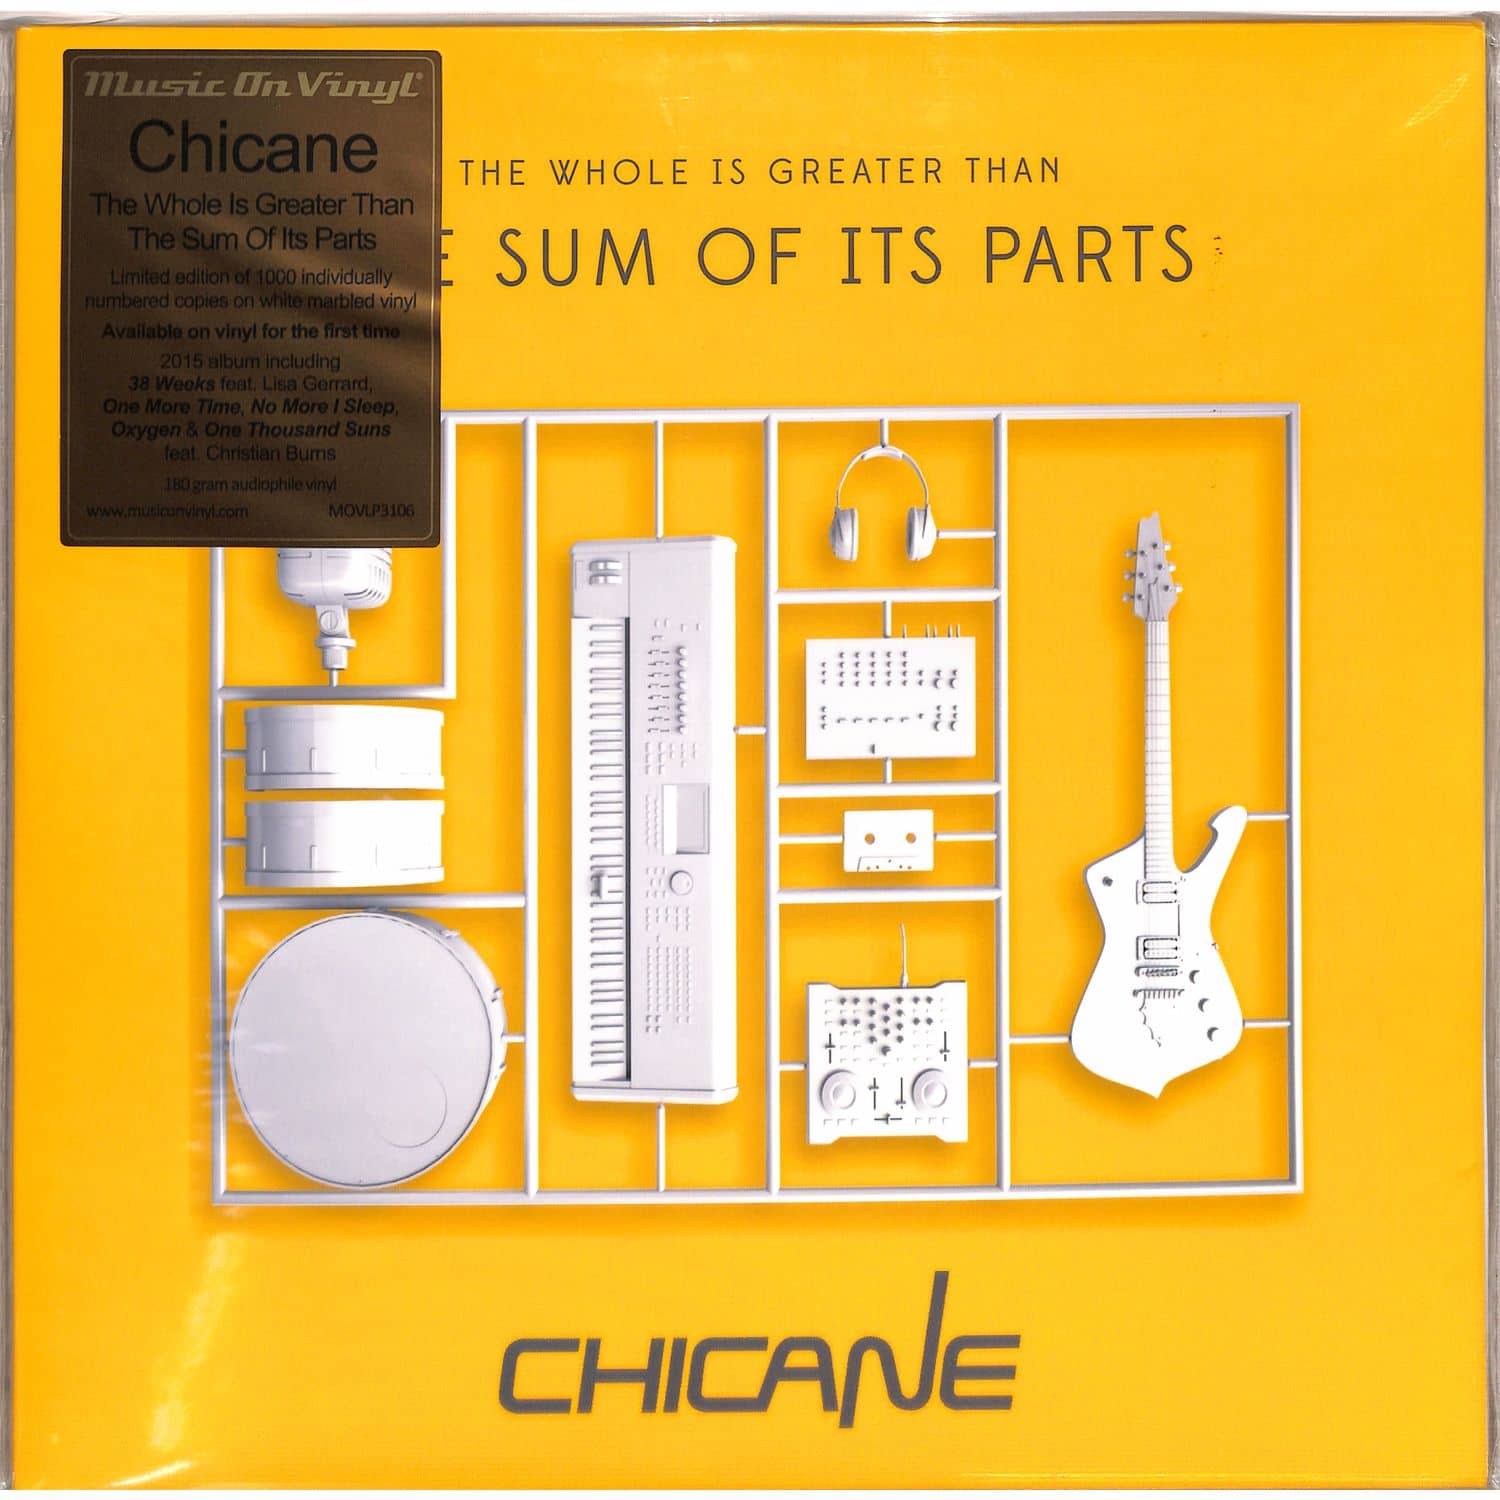 Chicane - WHOLE IS GREATER THAN THE SUM OF ITS PARTS 